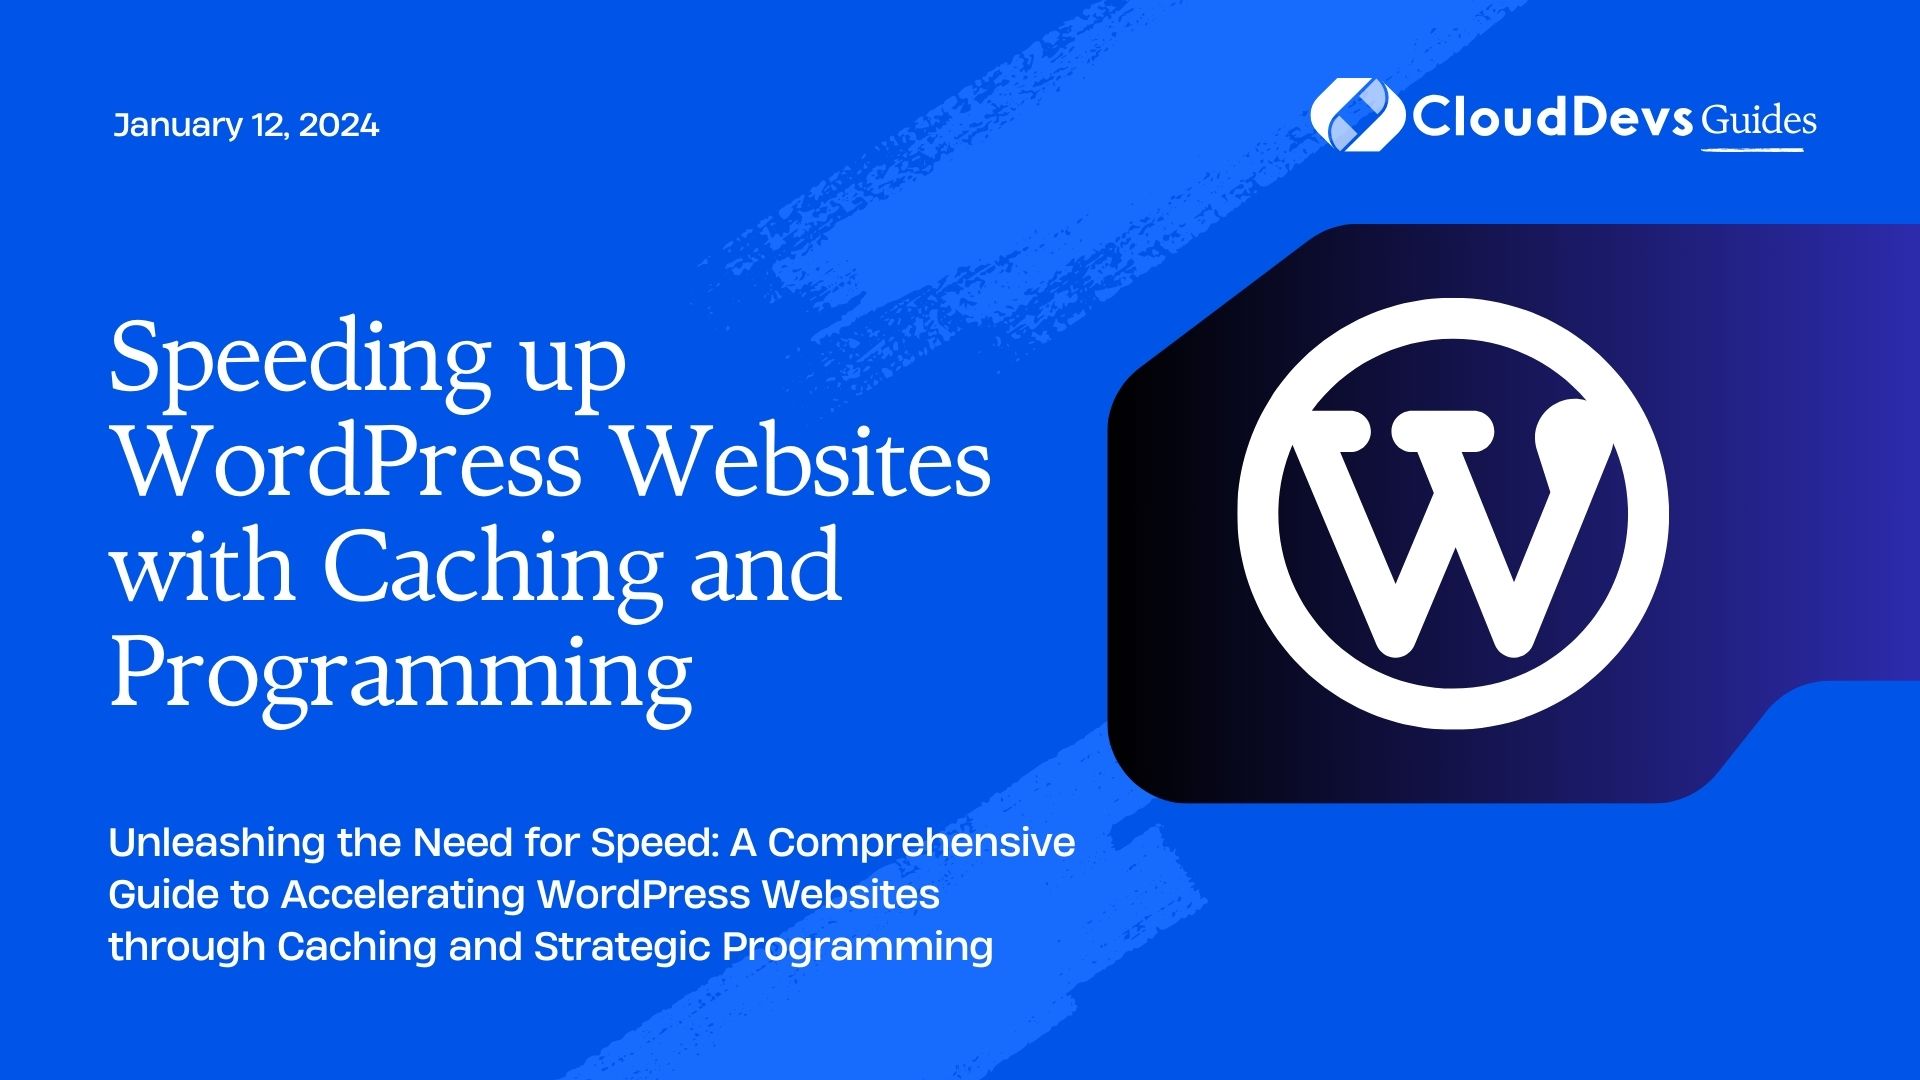 Speeding up WordPress Websites with Caching and Programming